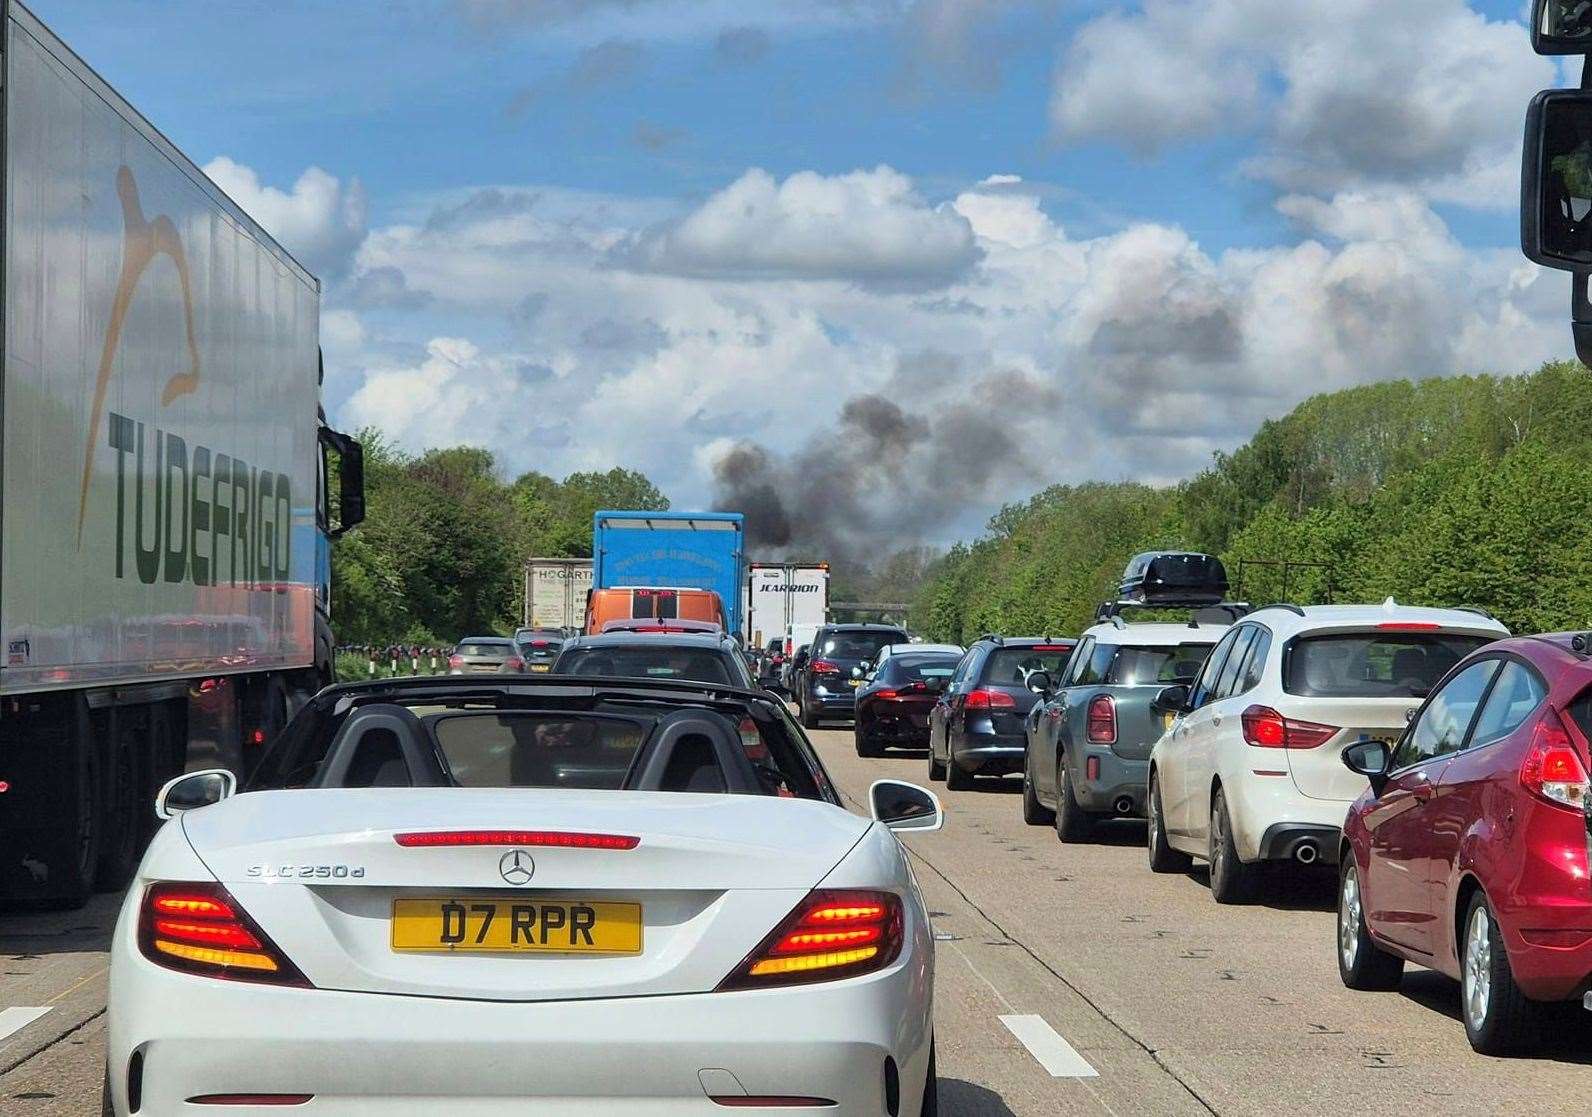 Smoke can be seen in the distance as Londonbound traffic is queued on the M20 between Ashford and Maidstone. Picture: Matt Gowen